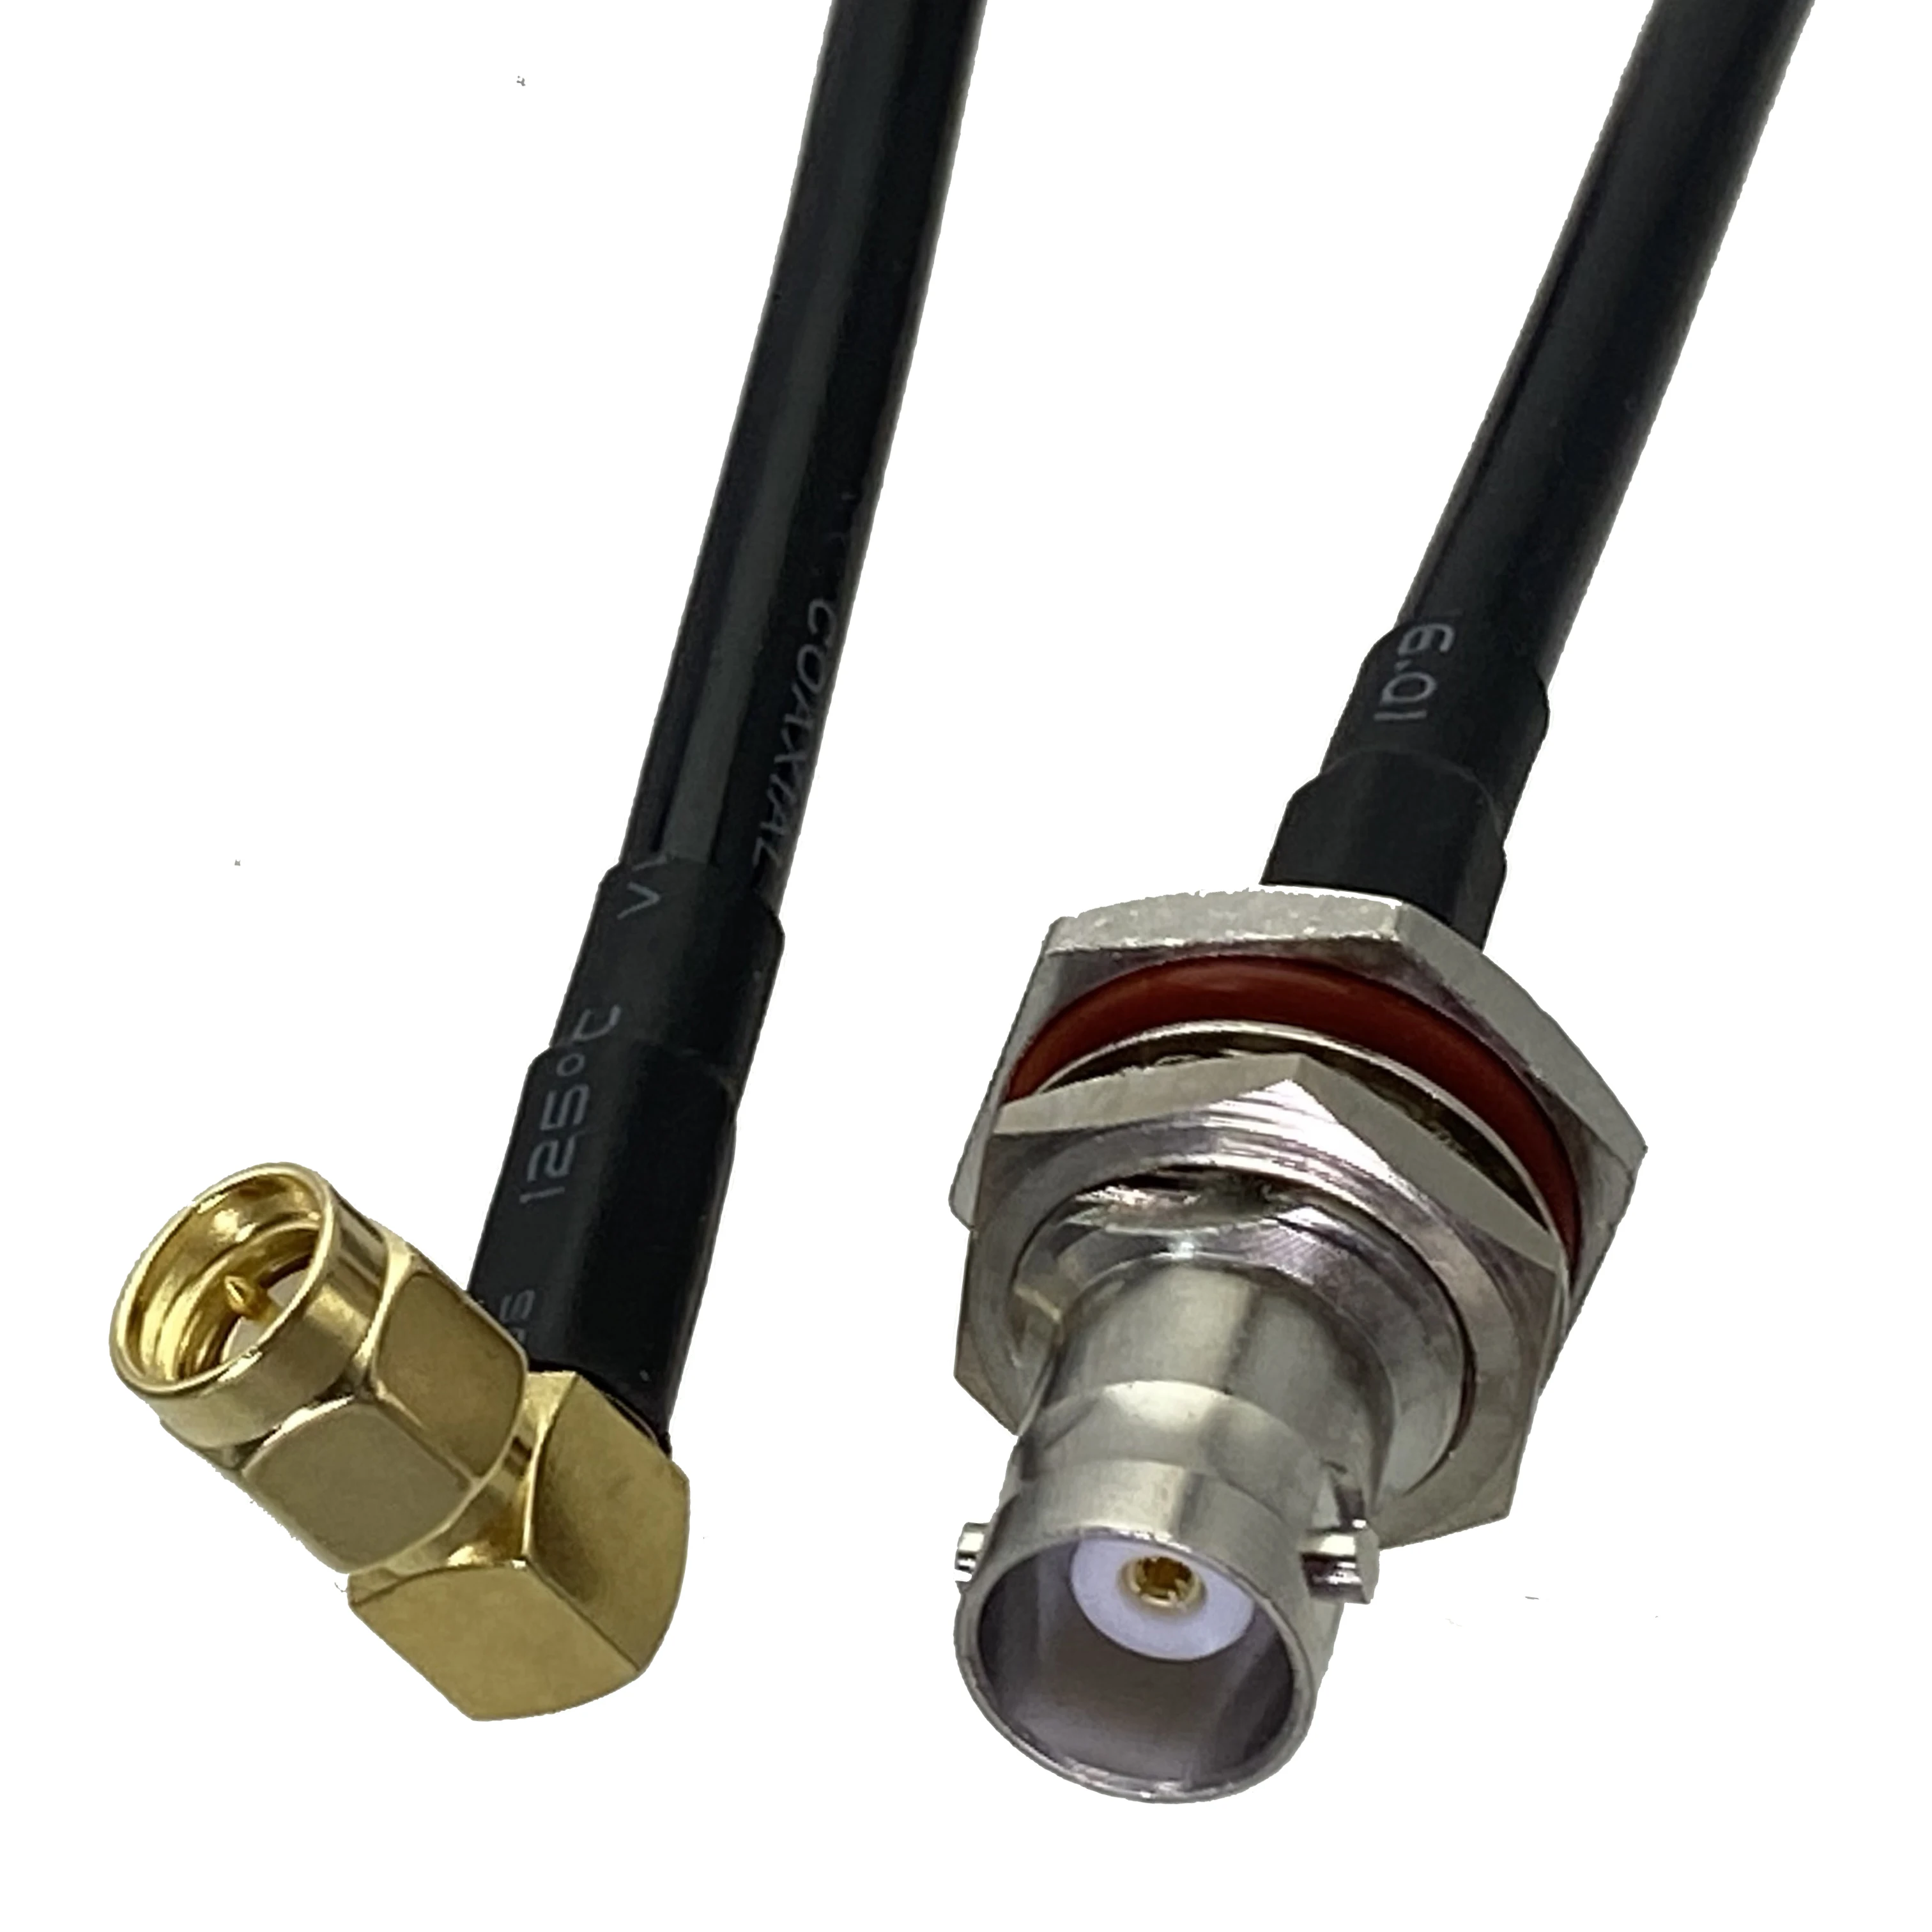 

1pcs RG58 SMA Male Plug Right Angle to BNC Female Jack Bulkhead RF Coaxial Connector Pigtail Jumper Cable New 6inch~5M